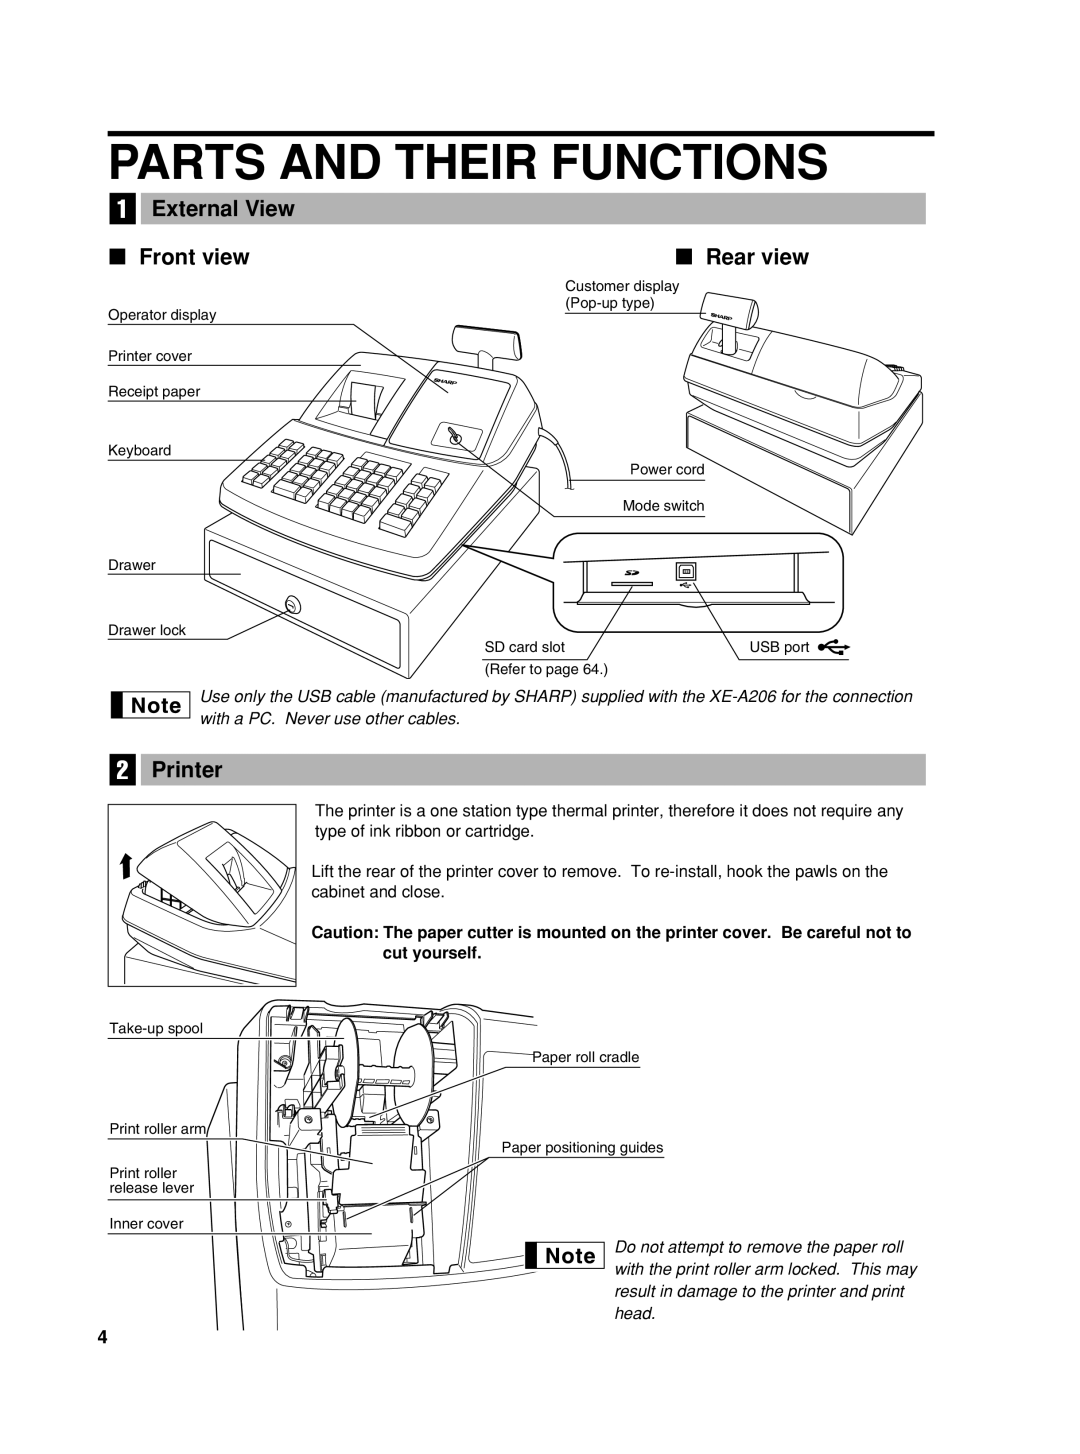 Sharp TINSZ2600RCZZ instruction manual Parts And Their Functions, External View, Front view, Rear view, Printer 